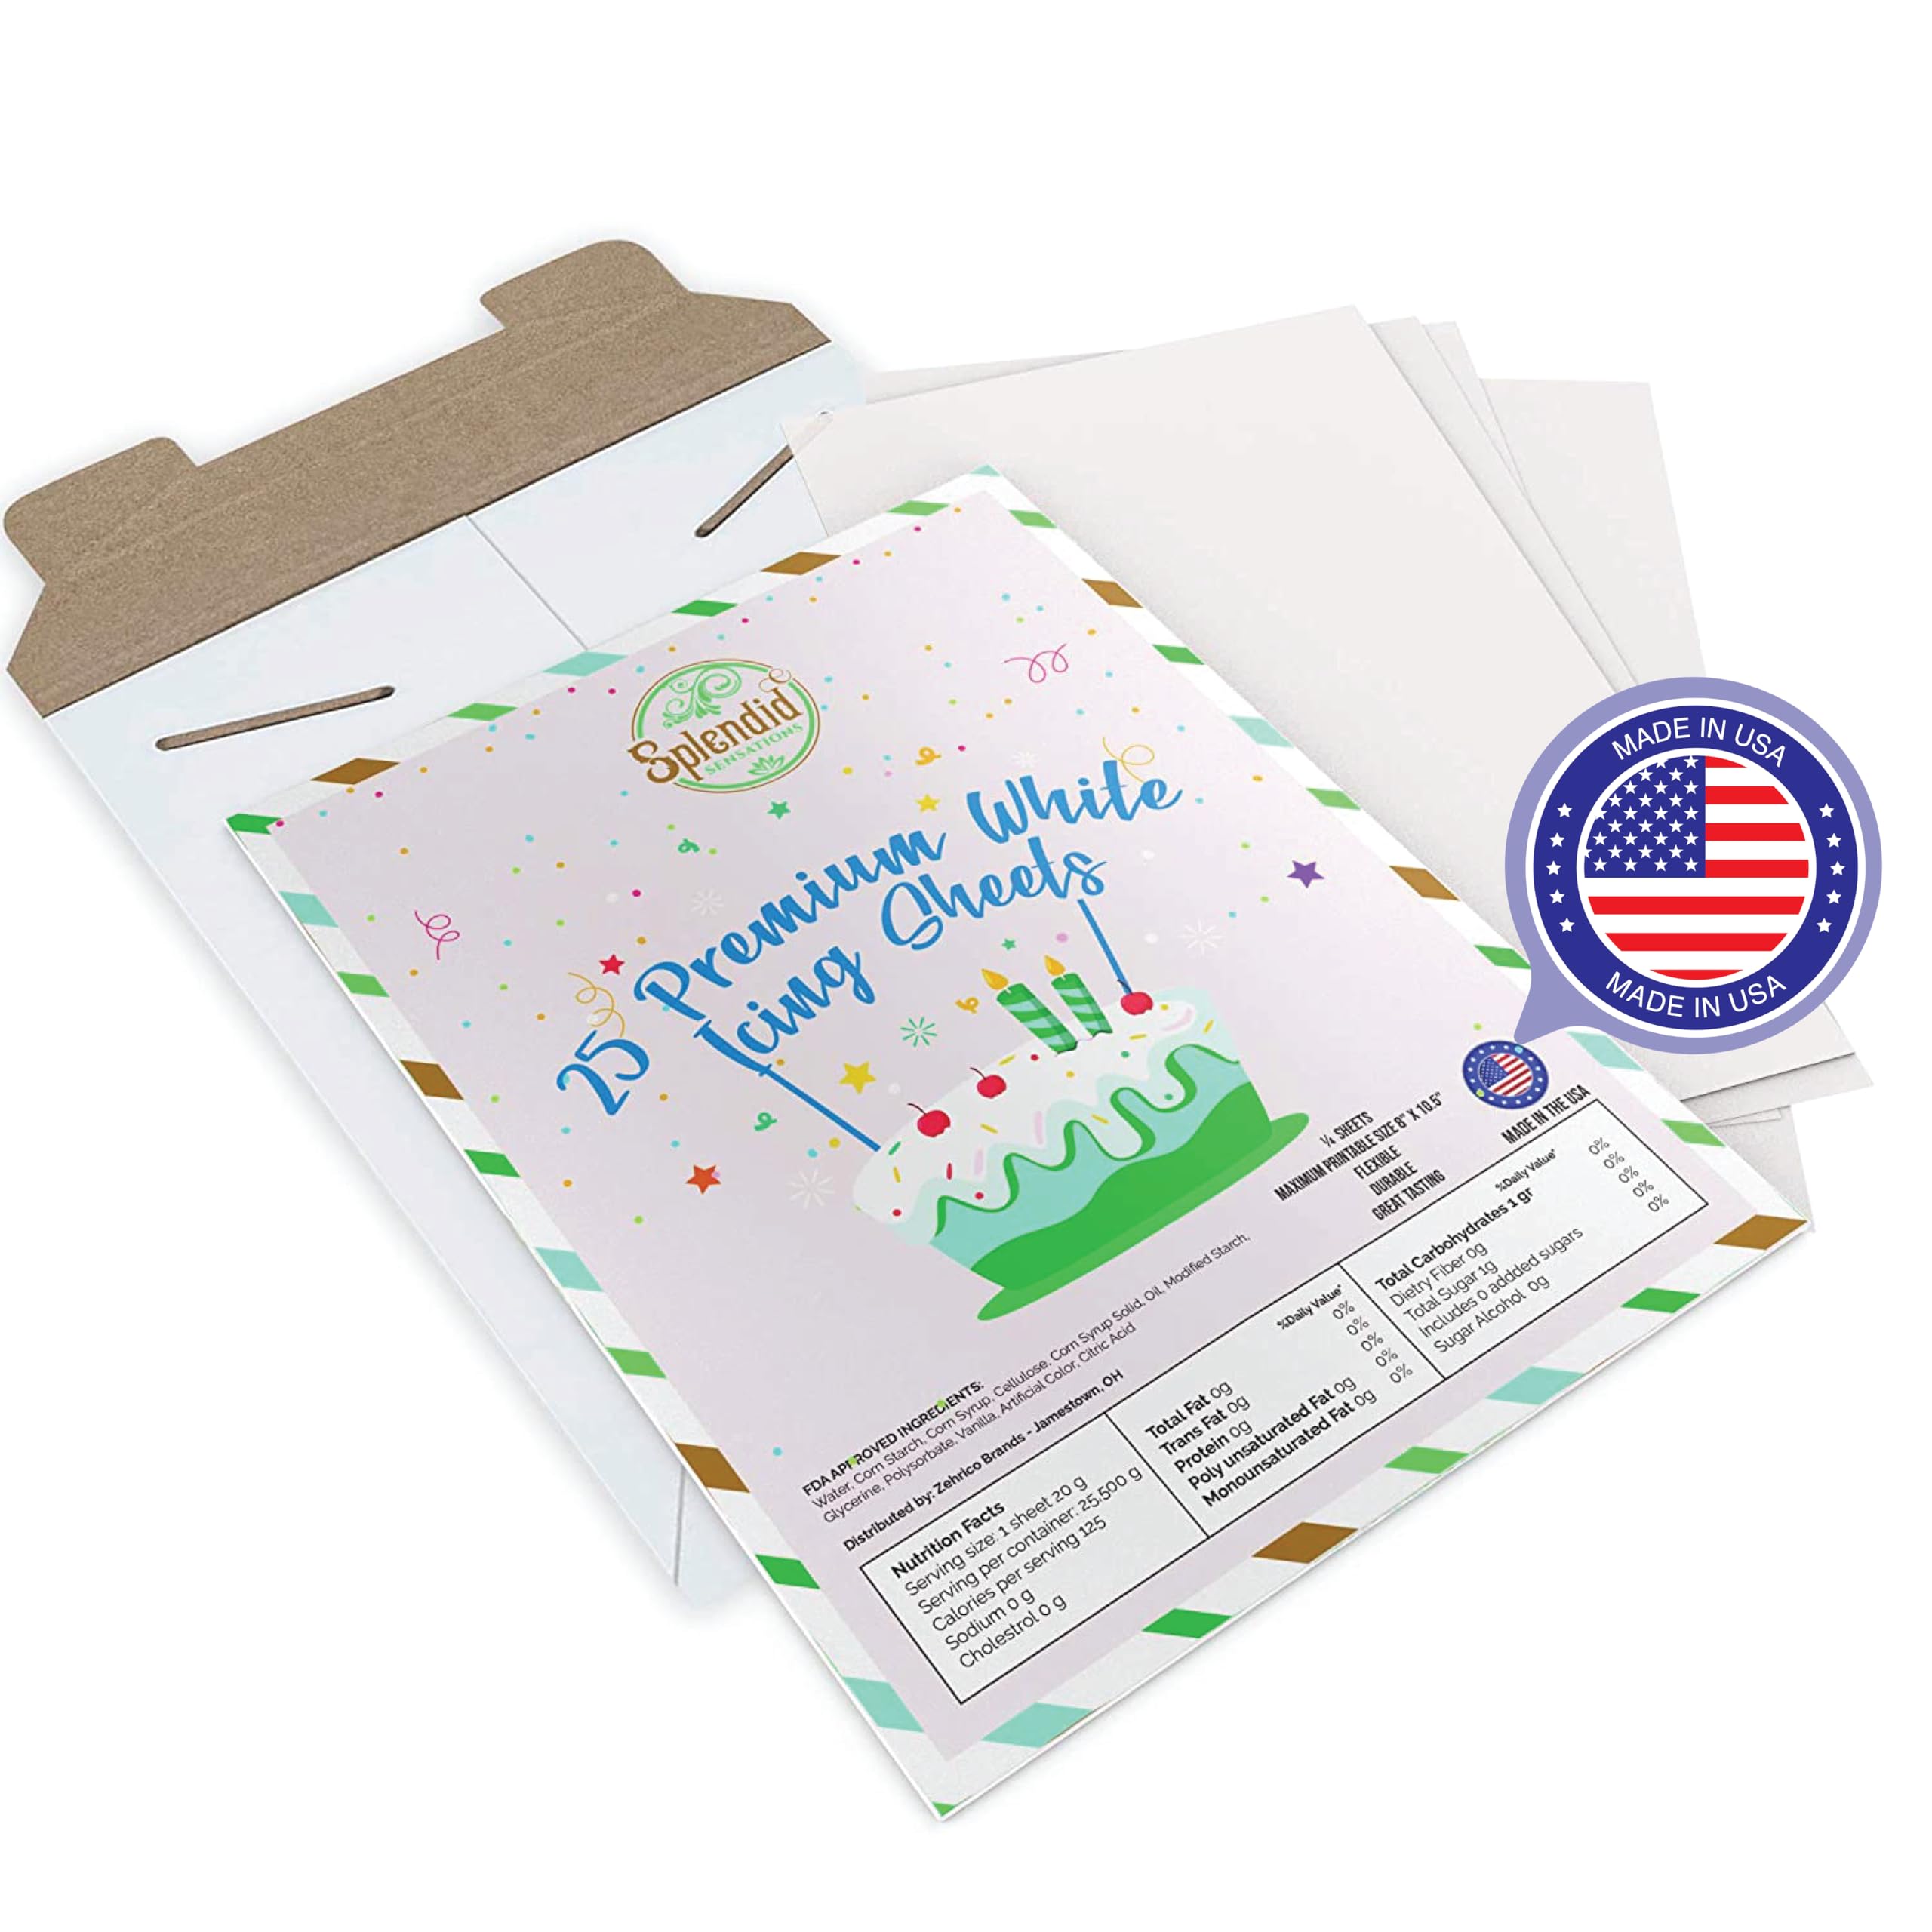 25 Sheets of A4 Size Quality Top That White Edible Wafer Paper